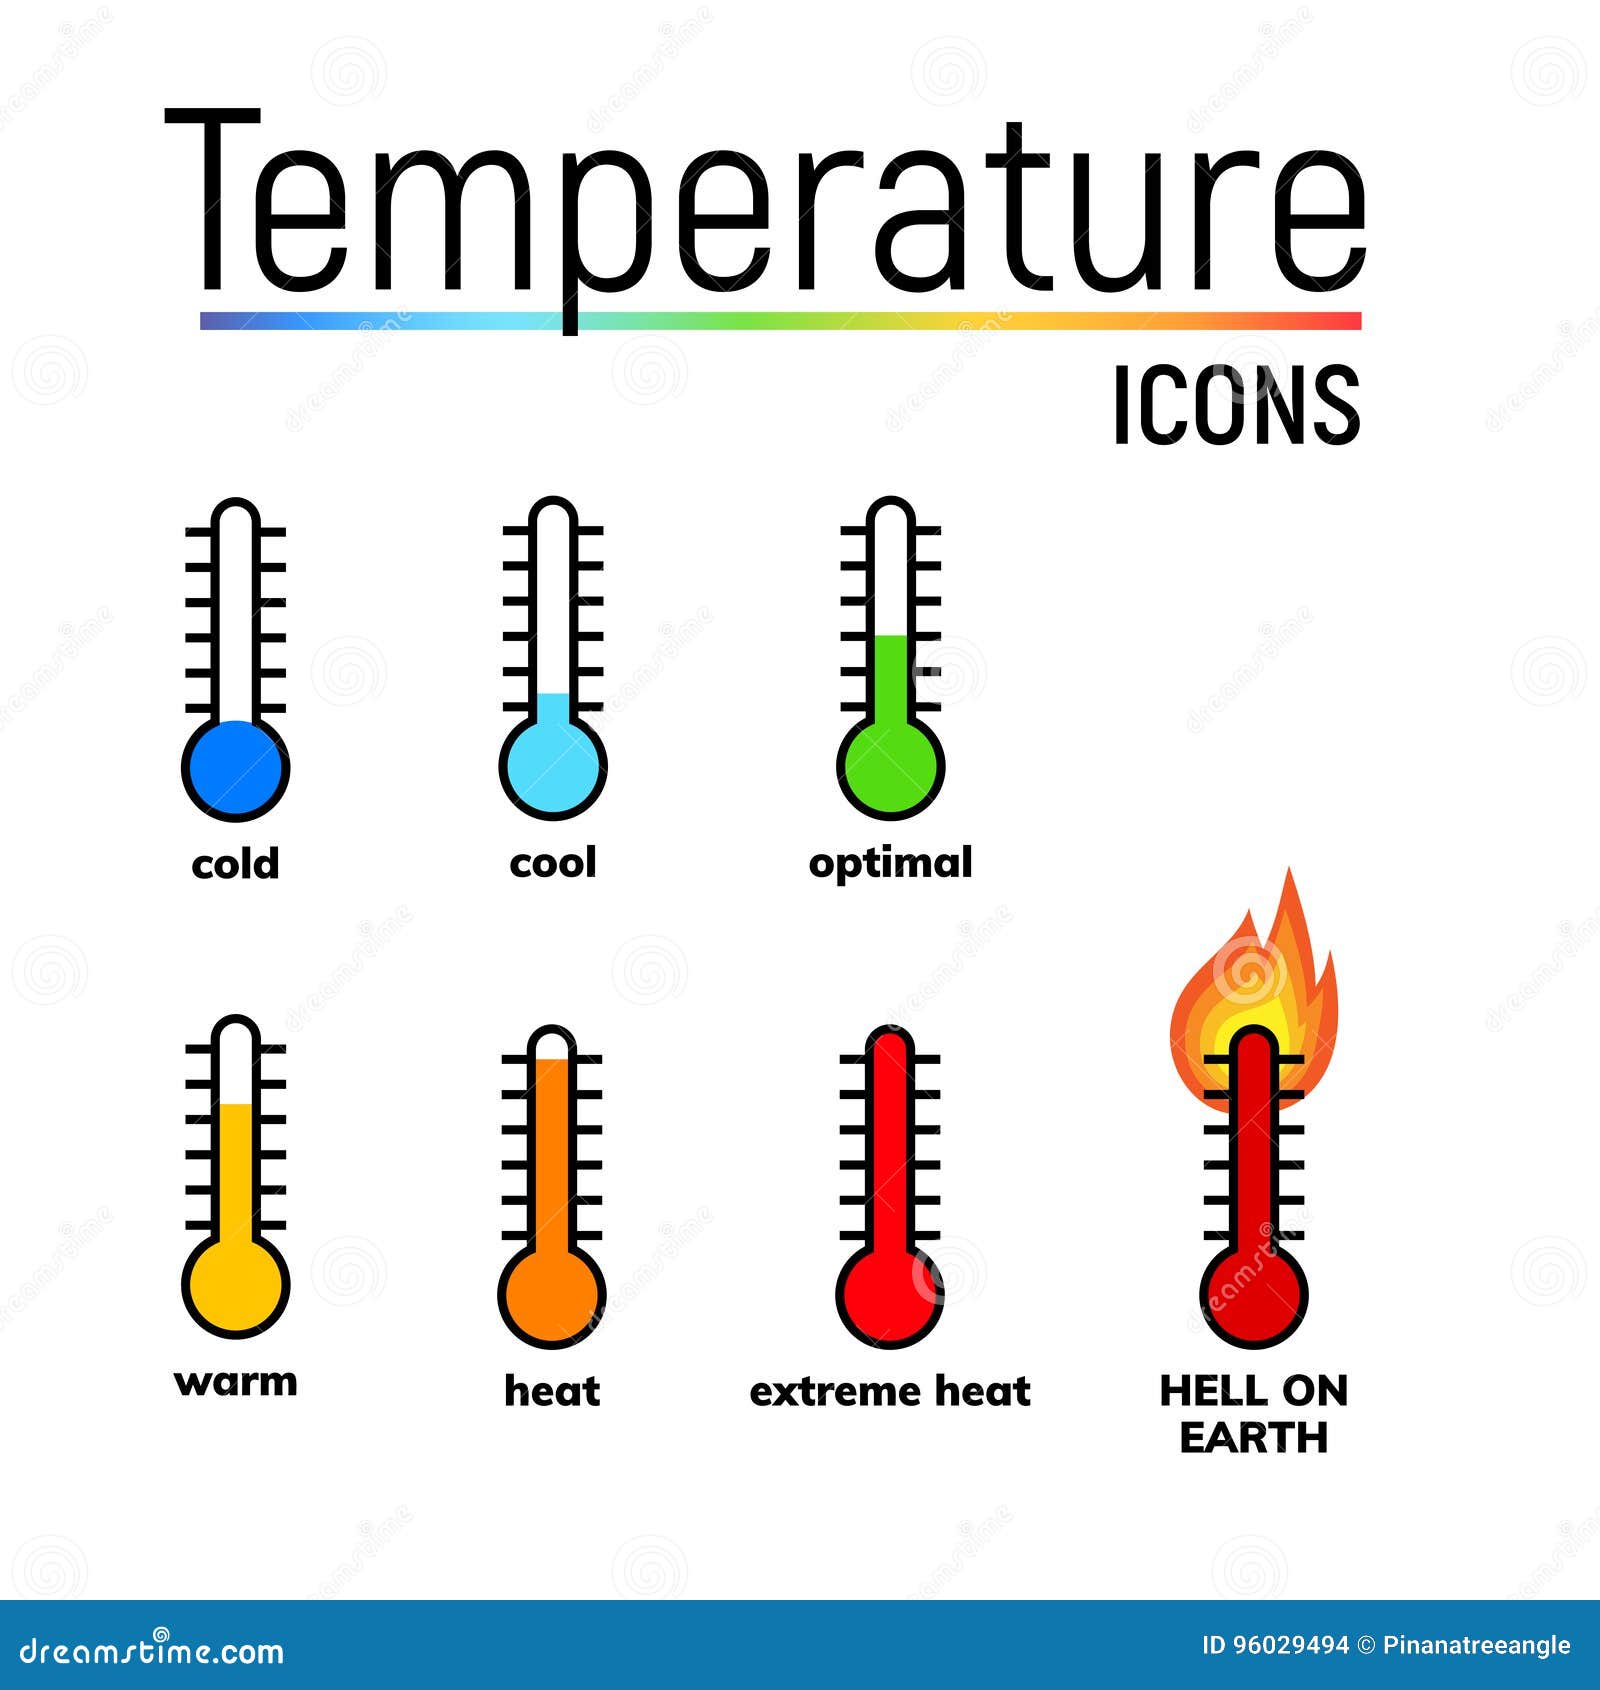 https://thumbs.dreamstime.com/z/temperature-icon-clip-art-icons-set-arts-narrow-range-mercury-thermometer-shows-different-weather-cold-cool-optimal-warm-heat-96029494.jpg